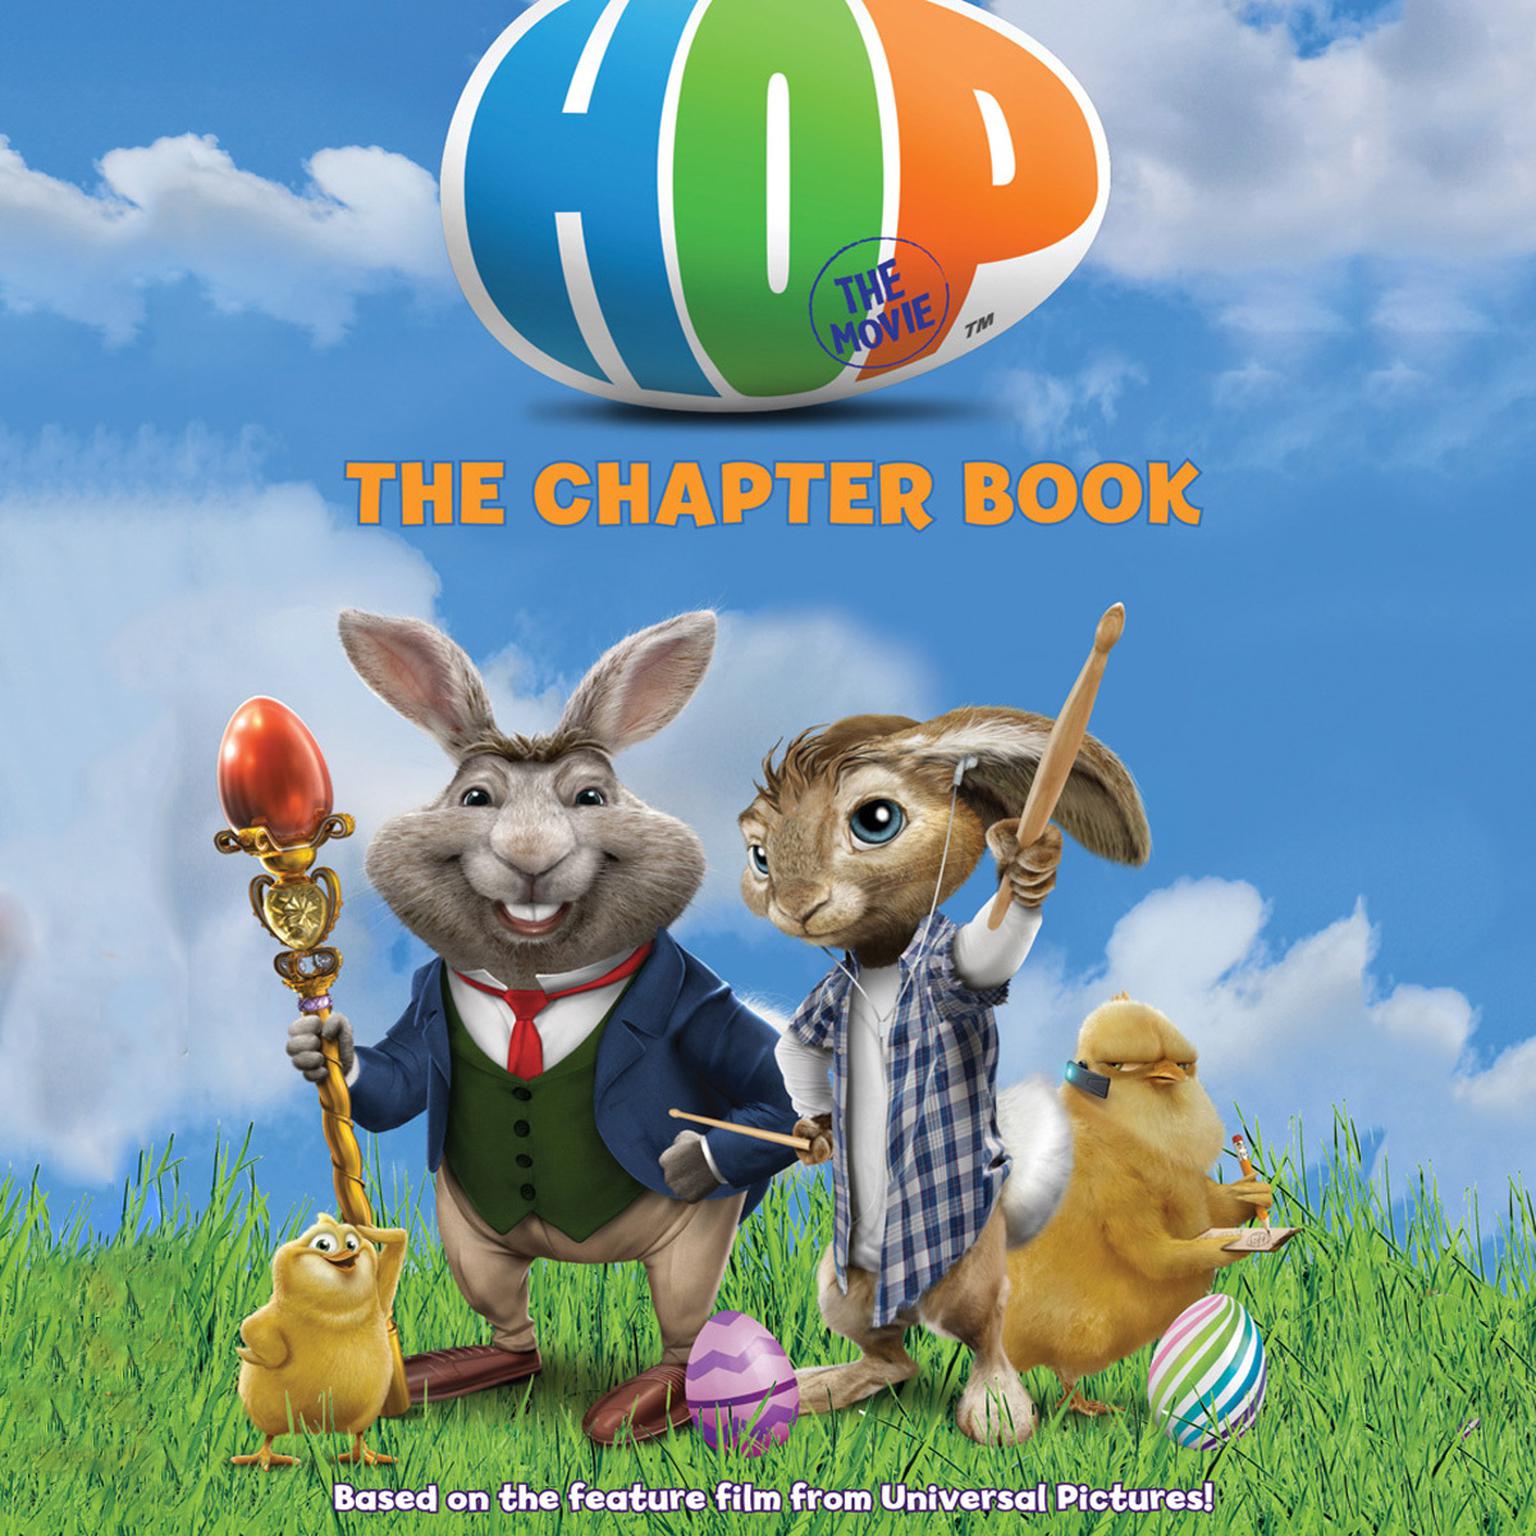 Hop: The Chapter Book: The Chapter Book Audiobook, by Annie Auerbach